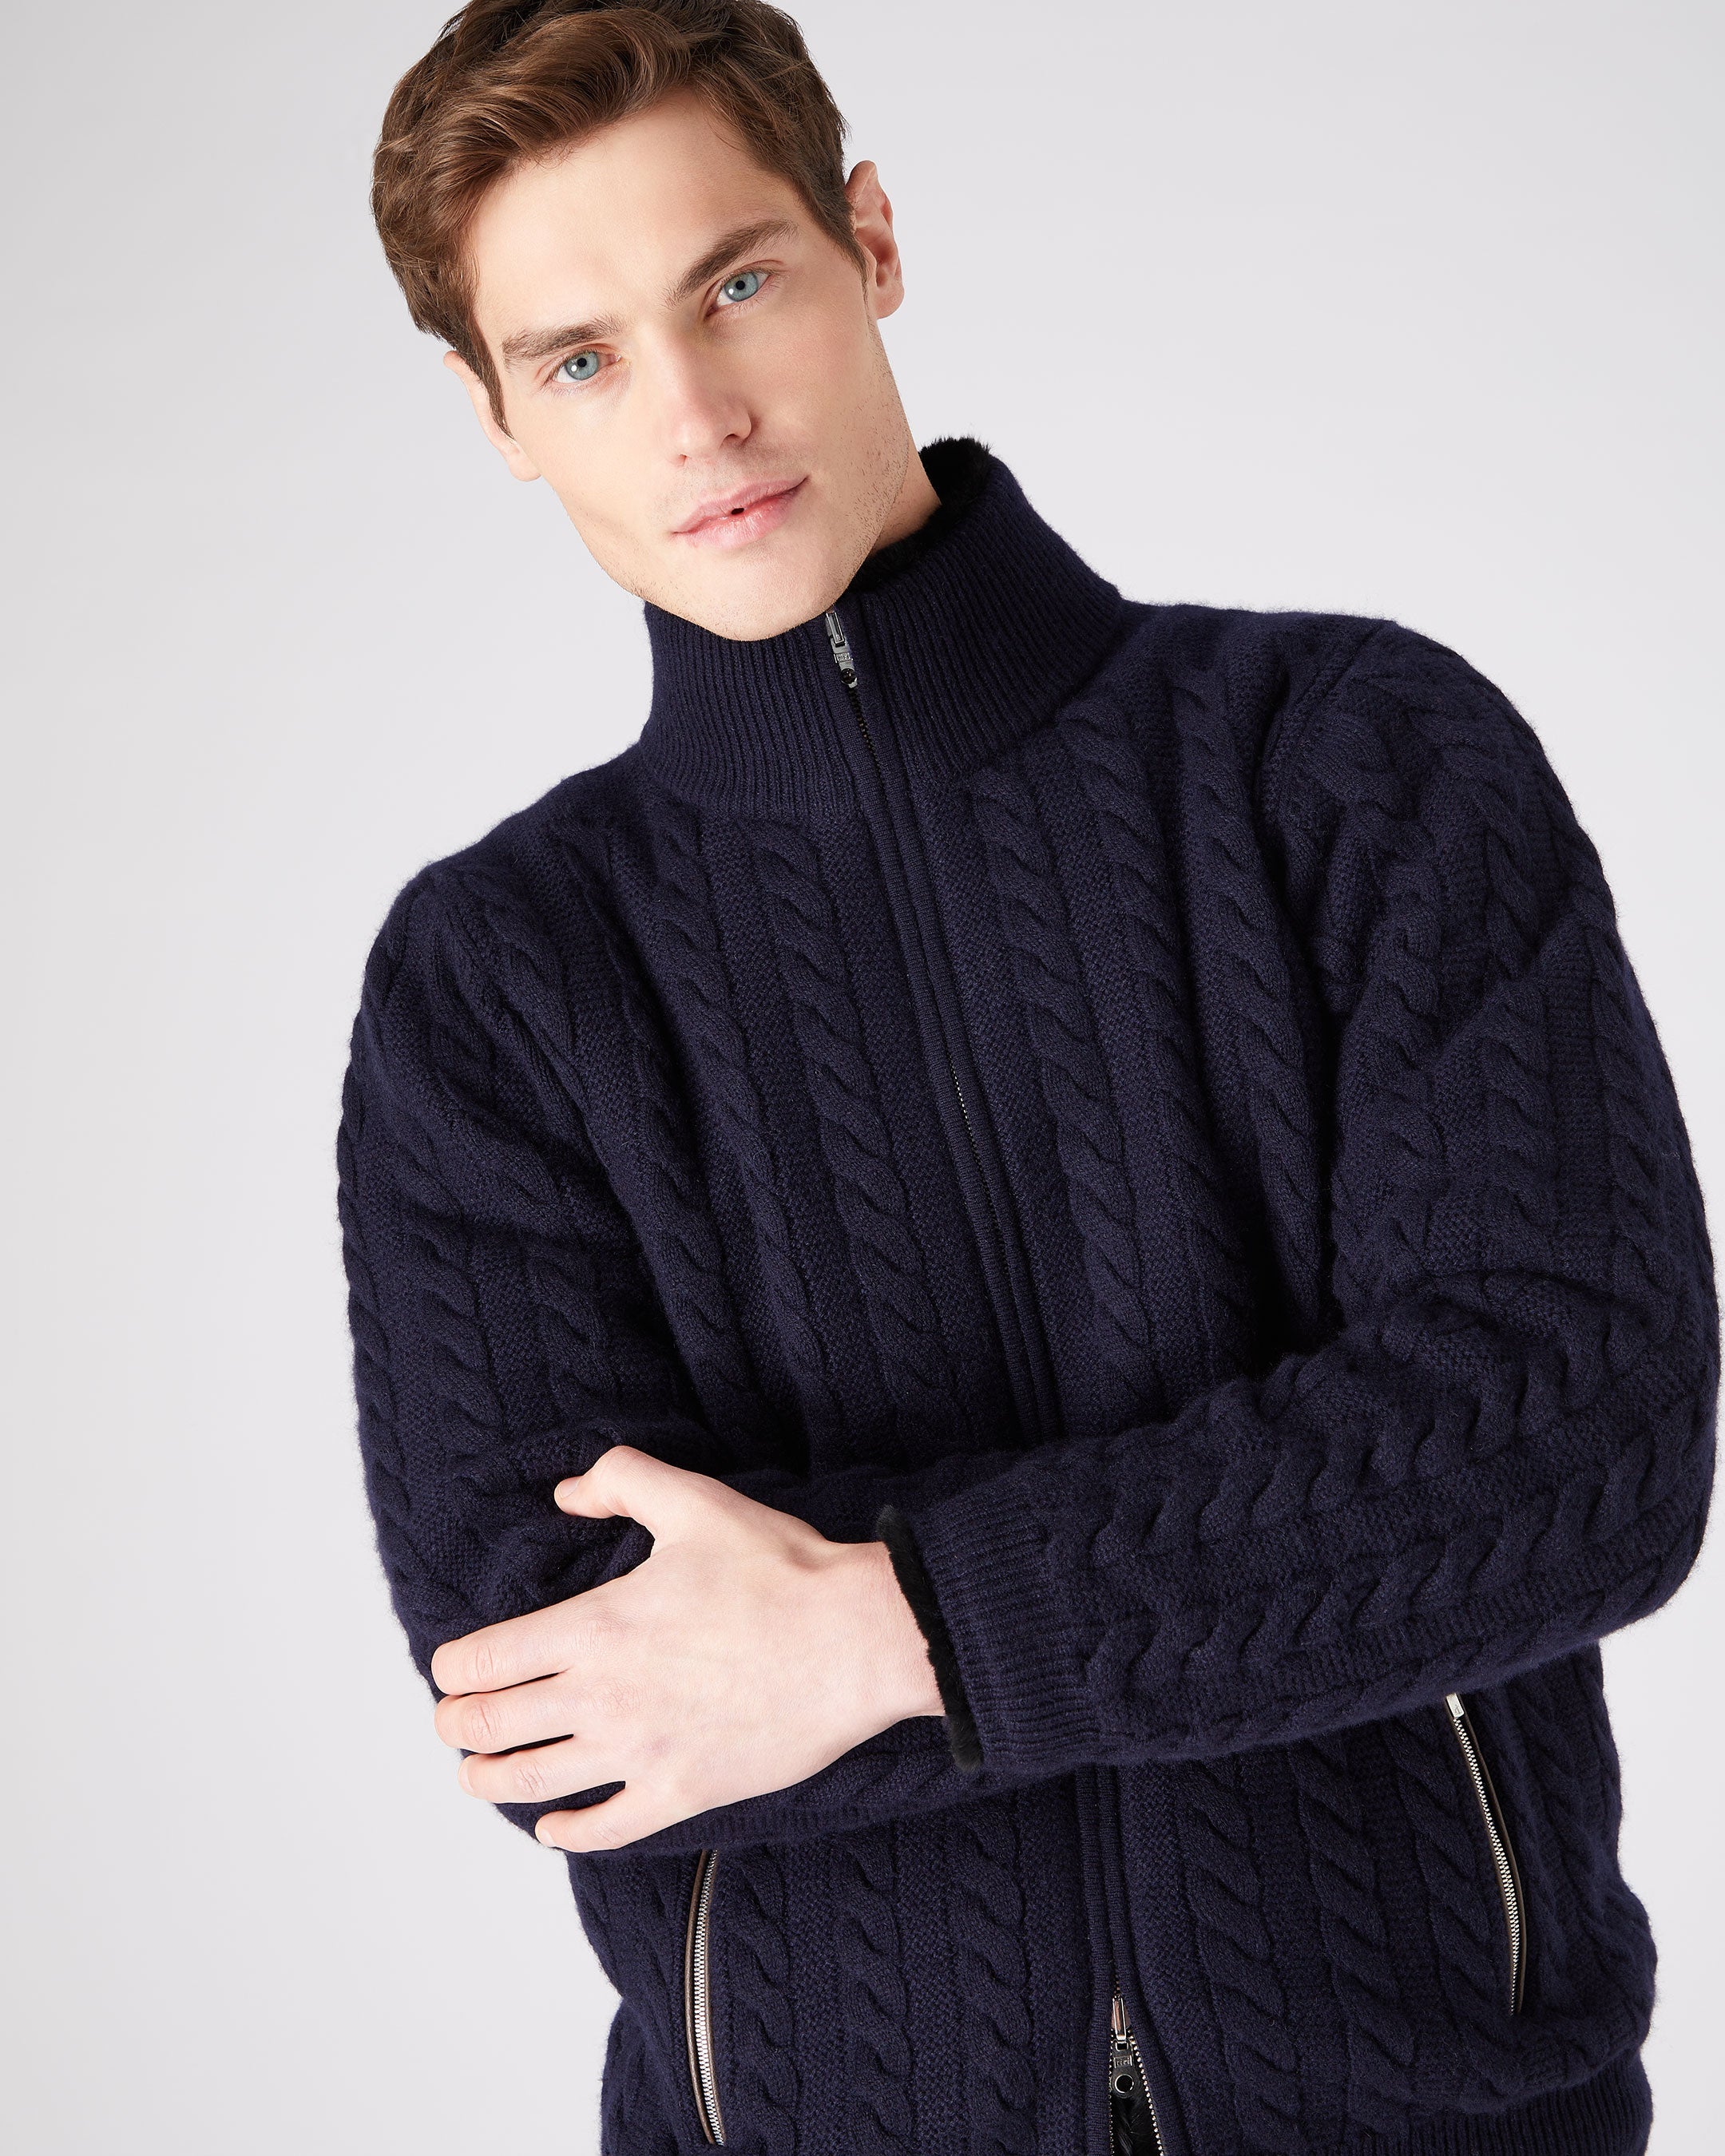 Men's Fur Lined Cable Cardigan Navy Blue | N.Peal